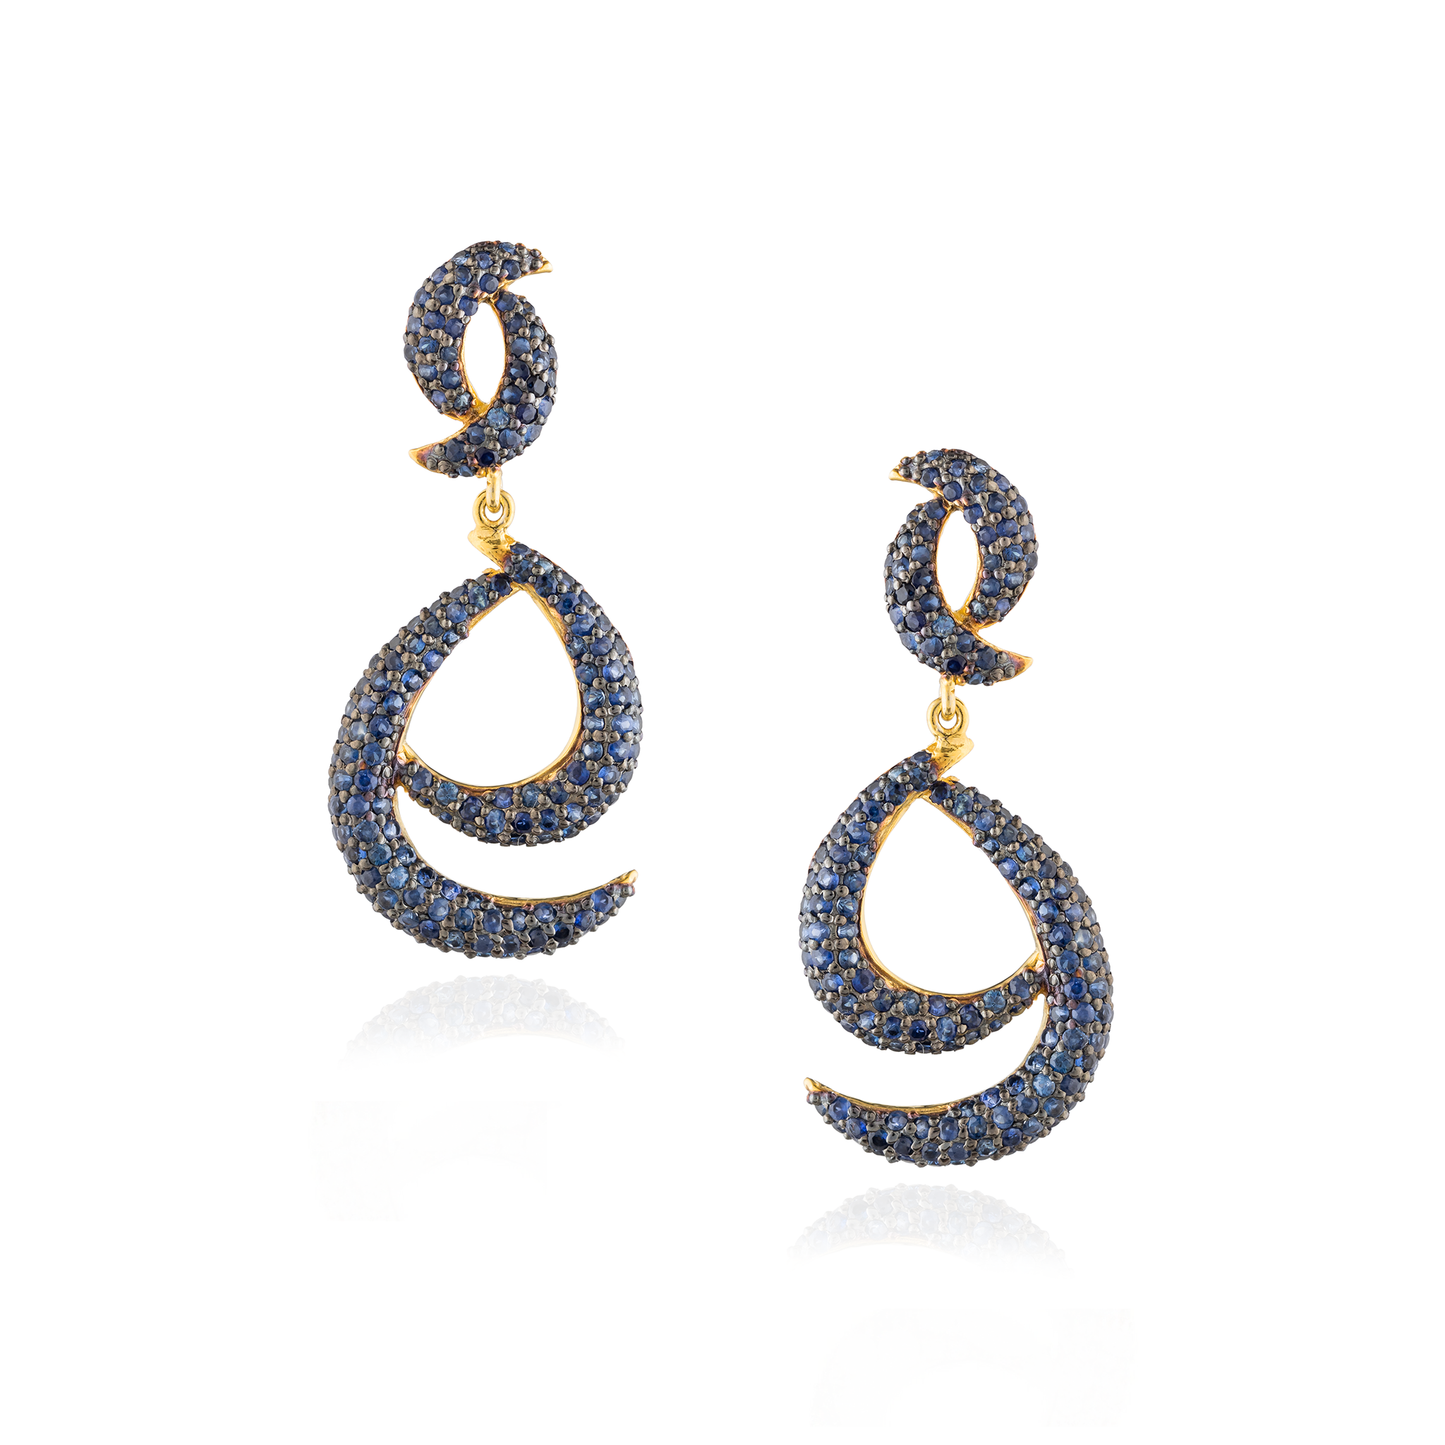 925 Silver Earring Plated in 18K Yellow Gold with Blue Sapphires